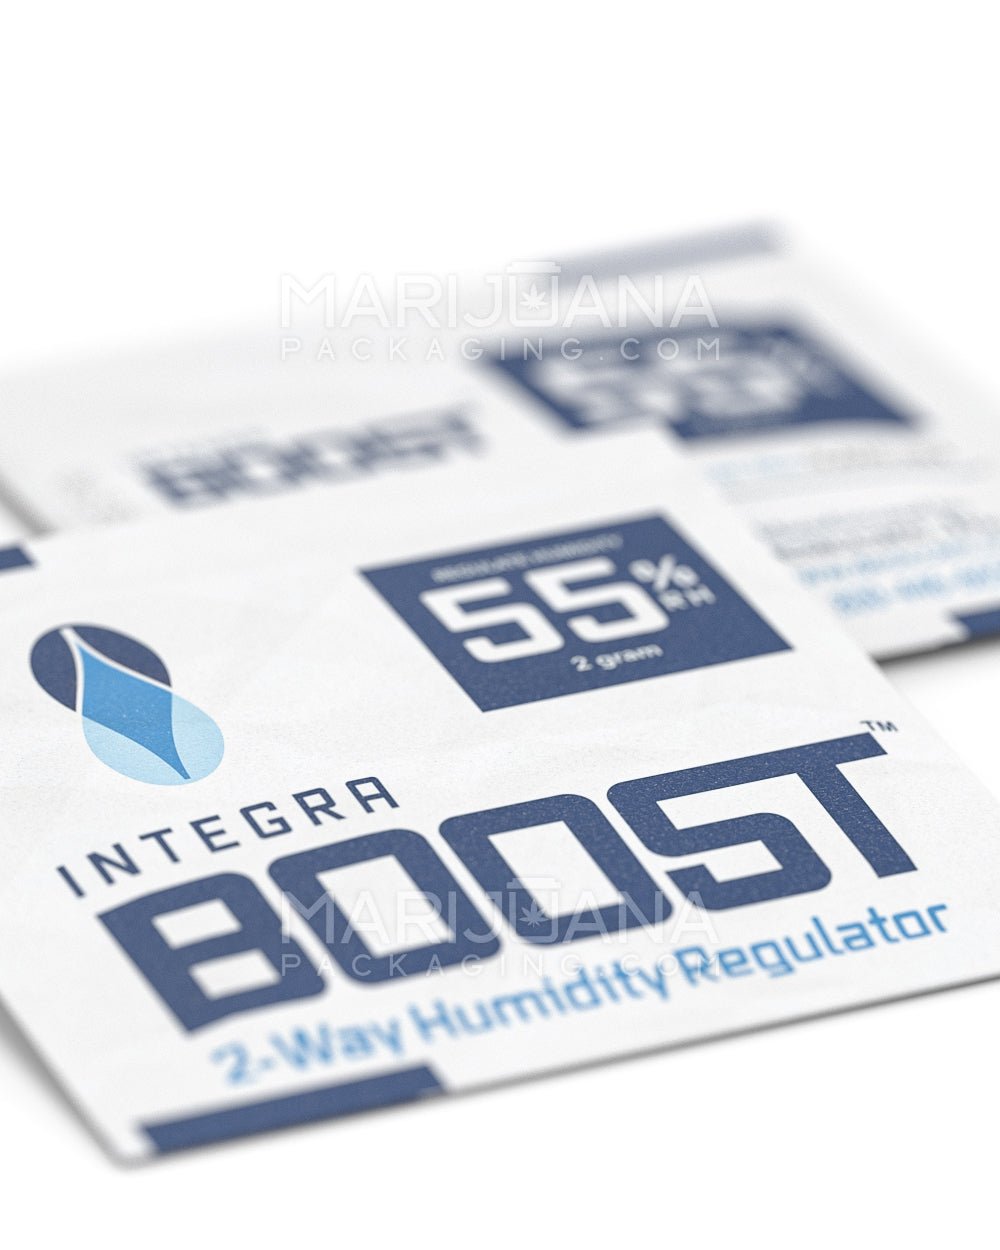 INTEGRA | Boost Humidity Control Packs | 2 Grams - 55% - 2000 Count - 4